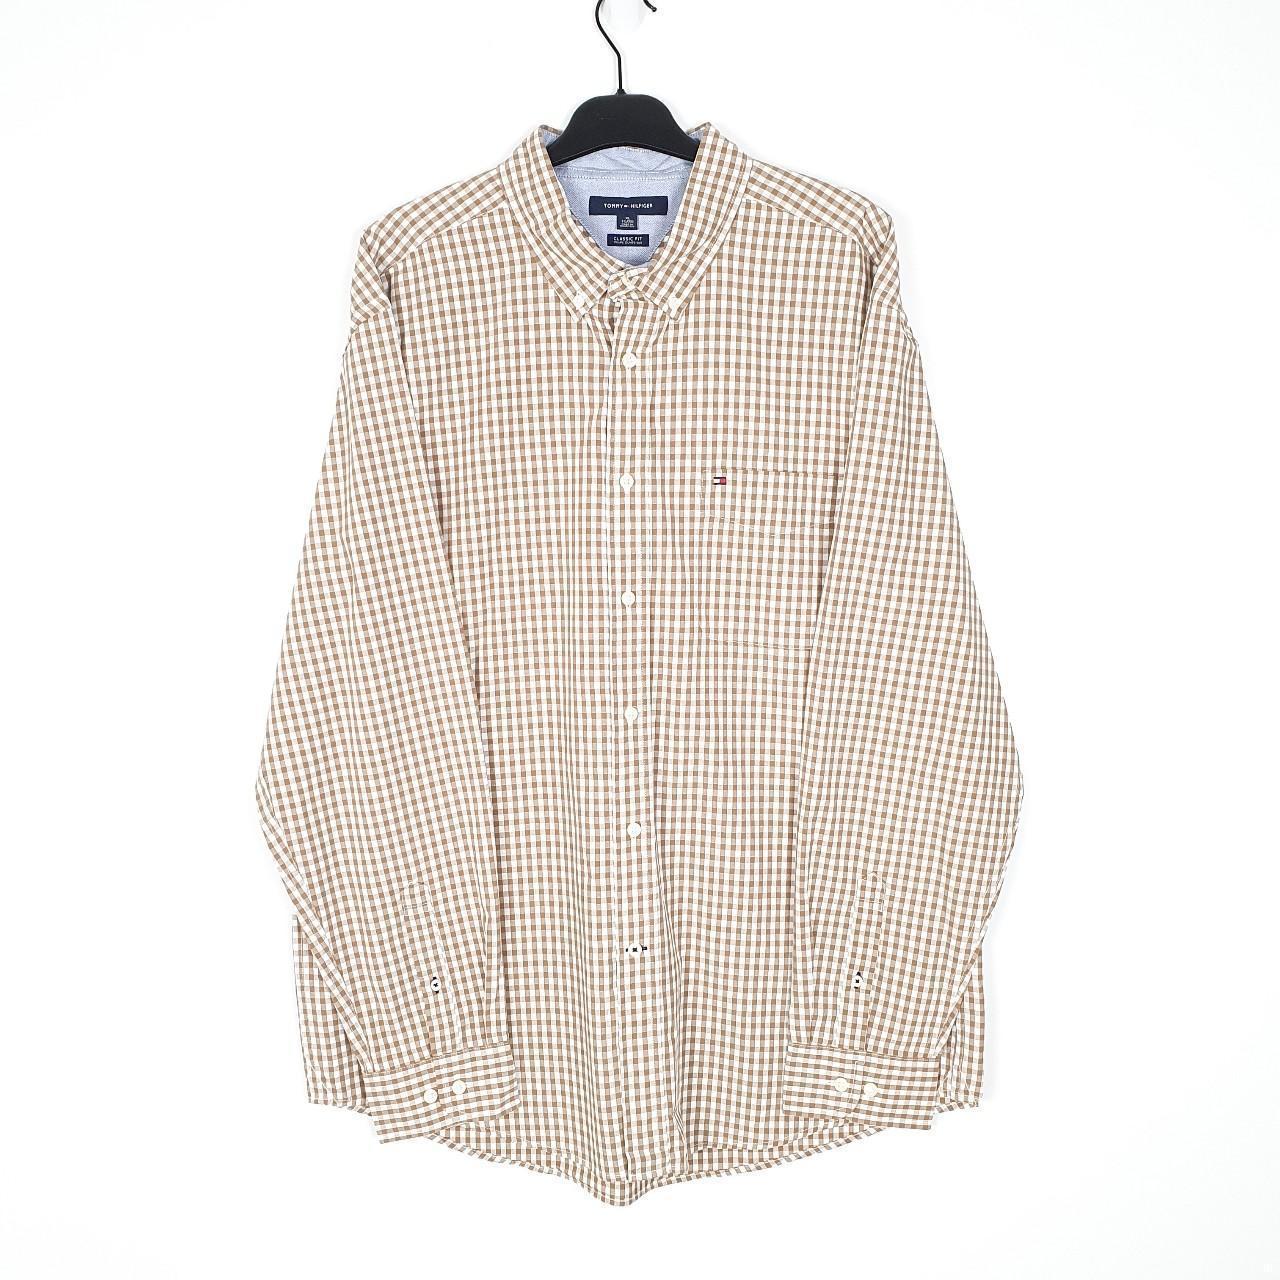 Tommy Hilfiger Long Sleeve Classic Fit Gingham Shirt